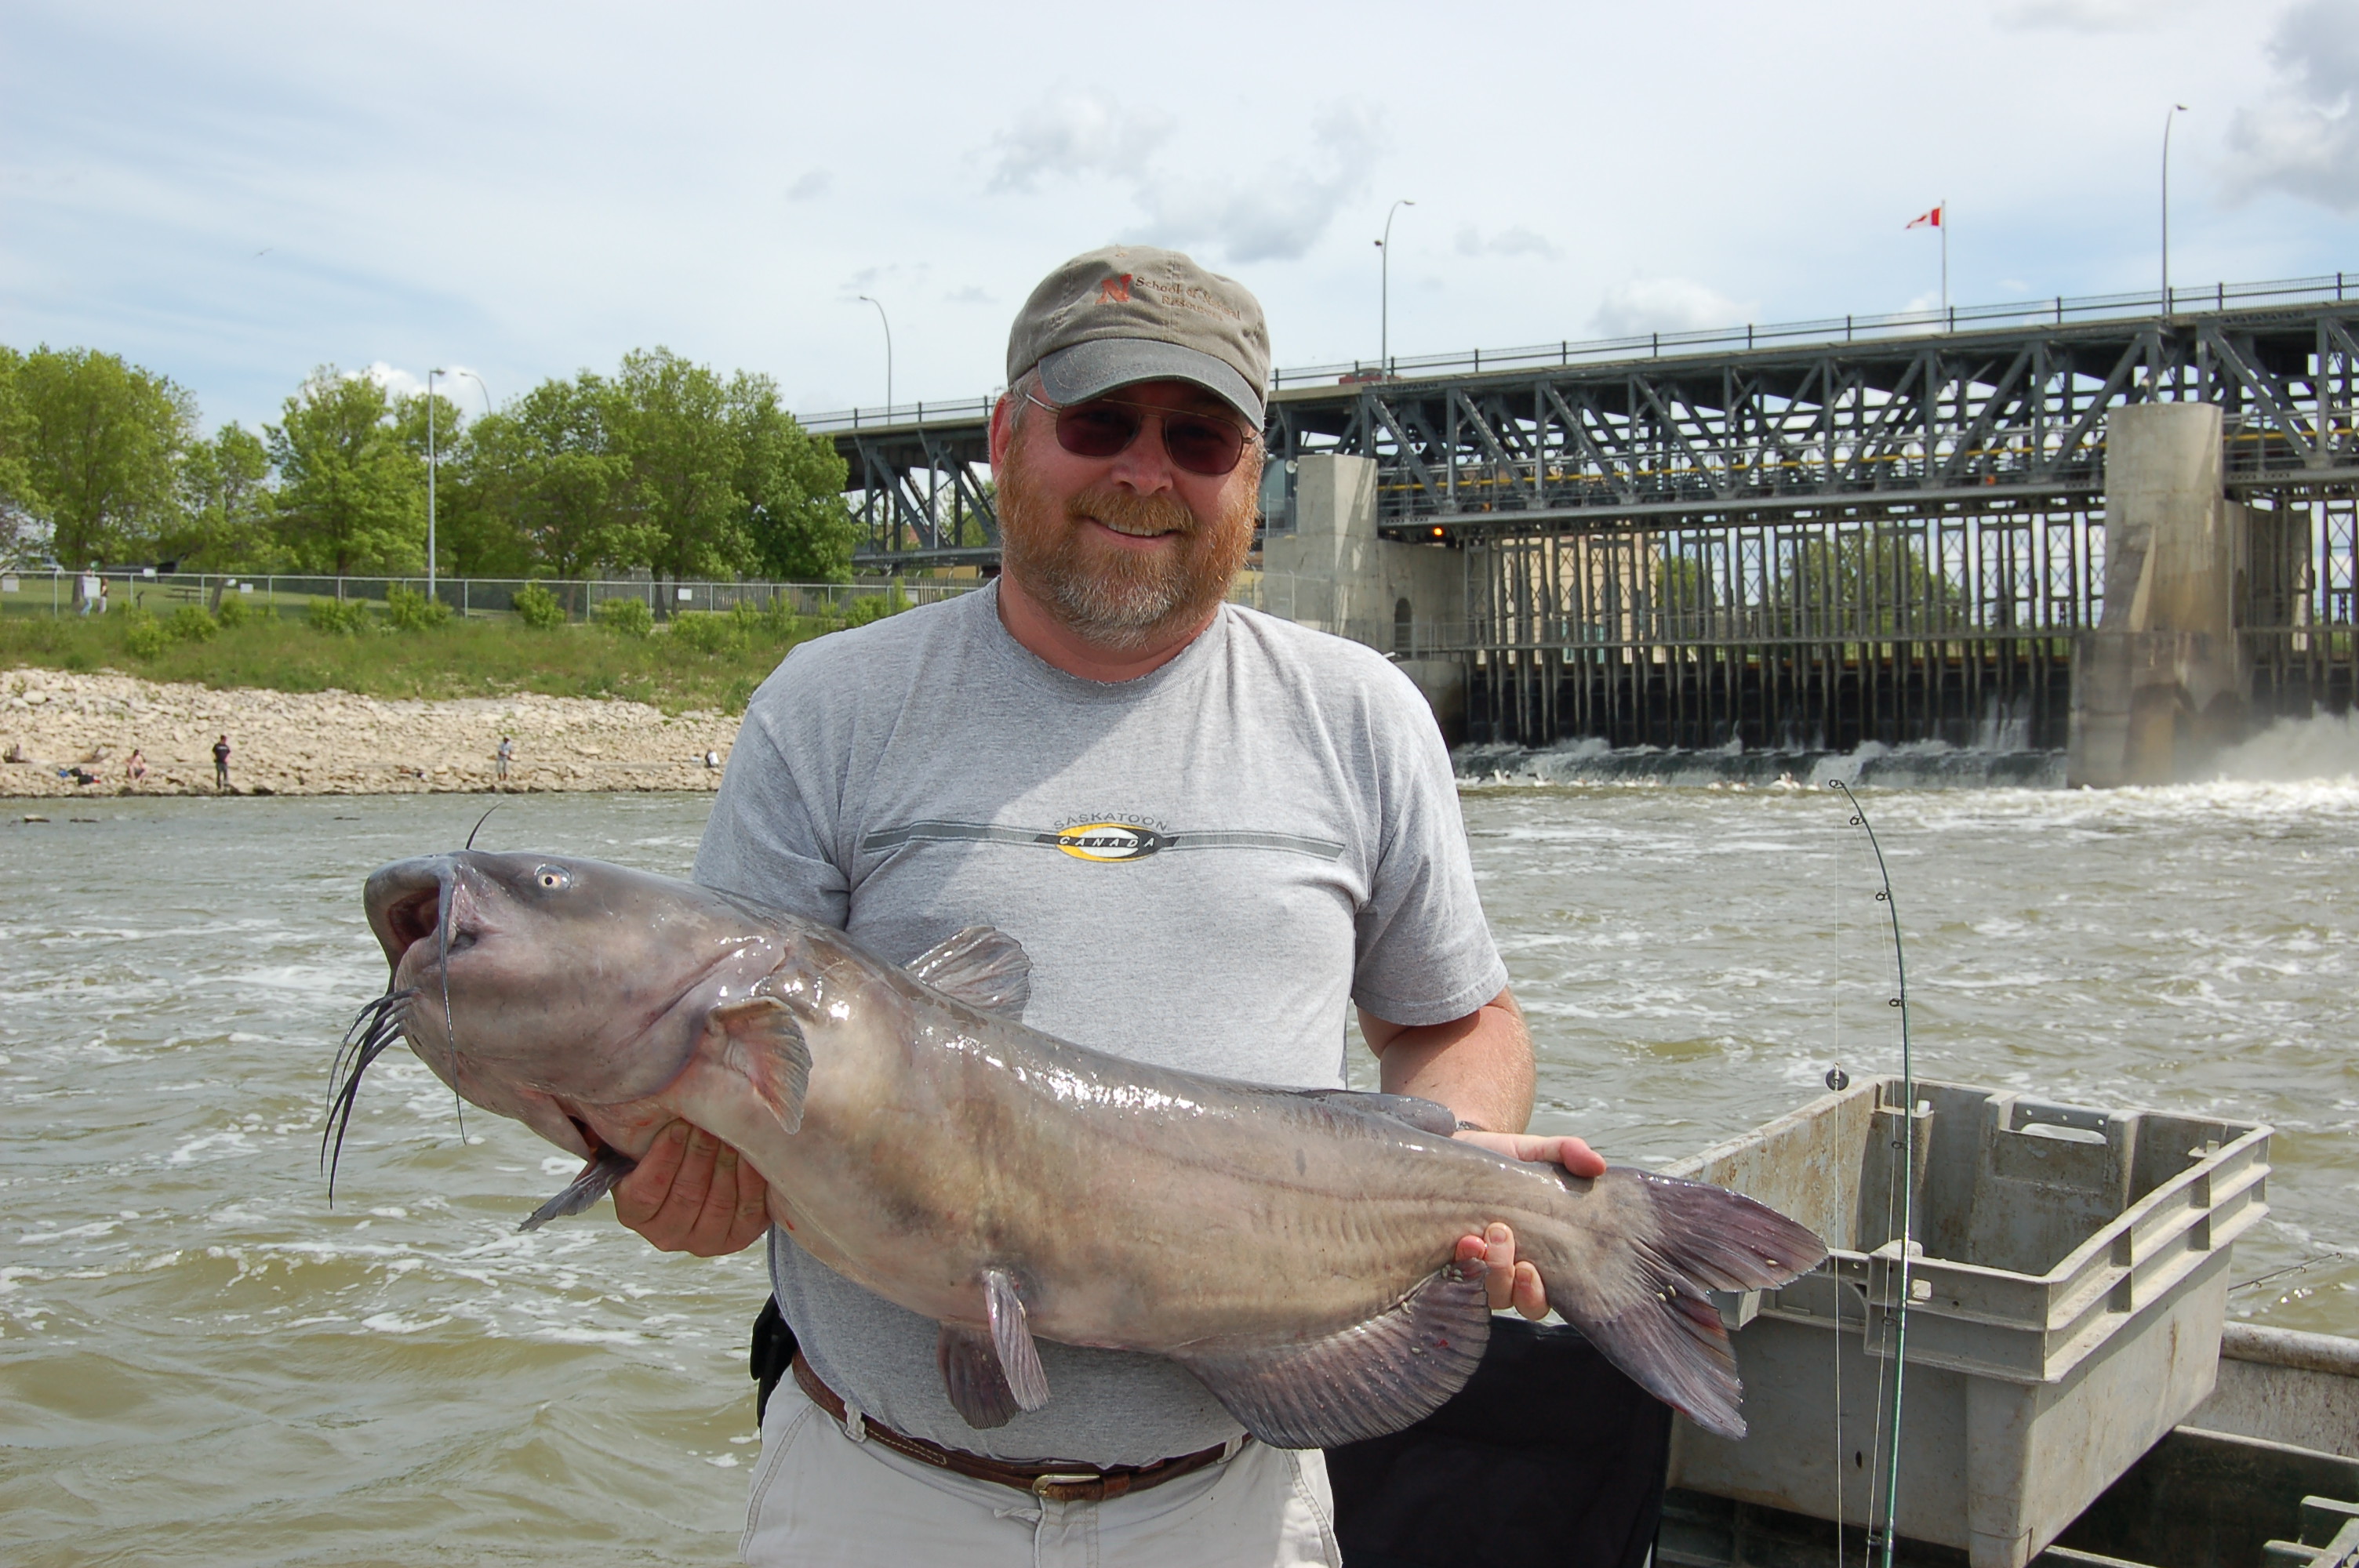 Mark Pegg recently recapped a major study on KXNO Des Moines, describing how he and a team of researchers tagged and tracked the movements of nearly 16,000 channel catfish.